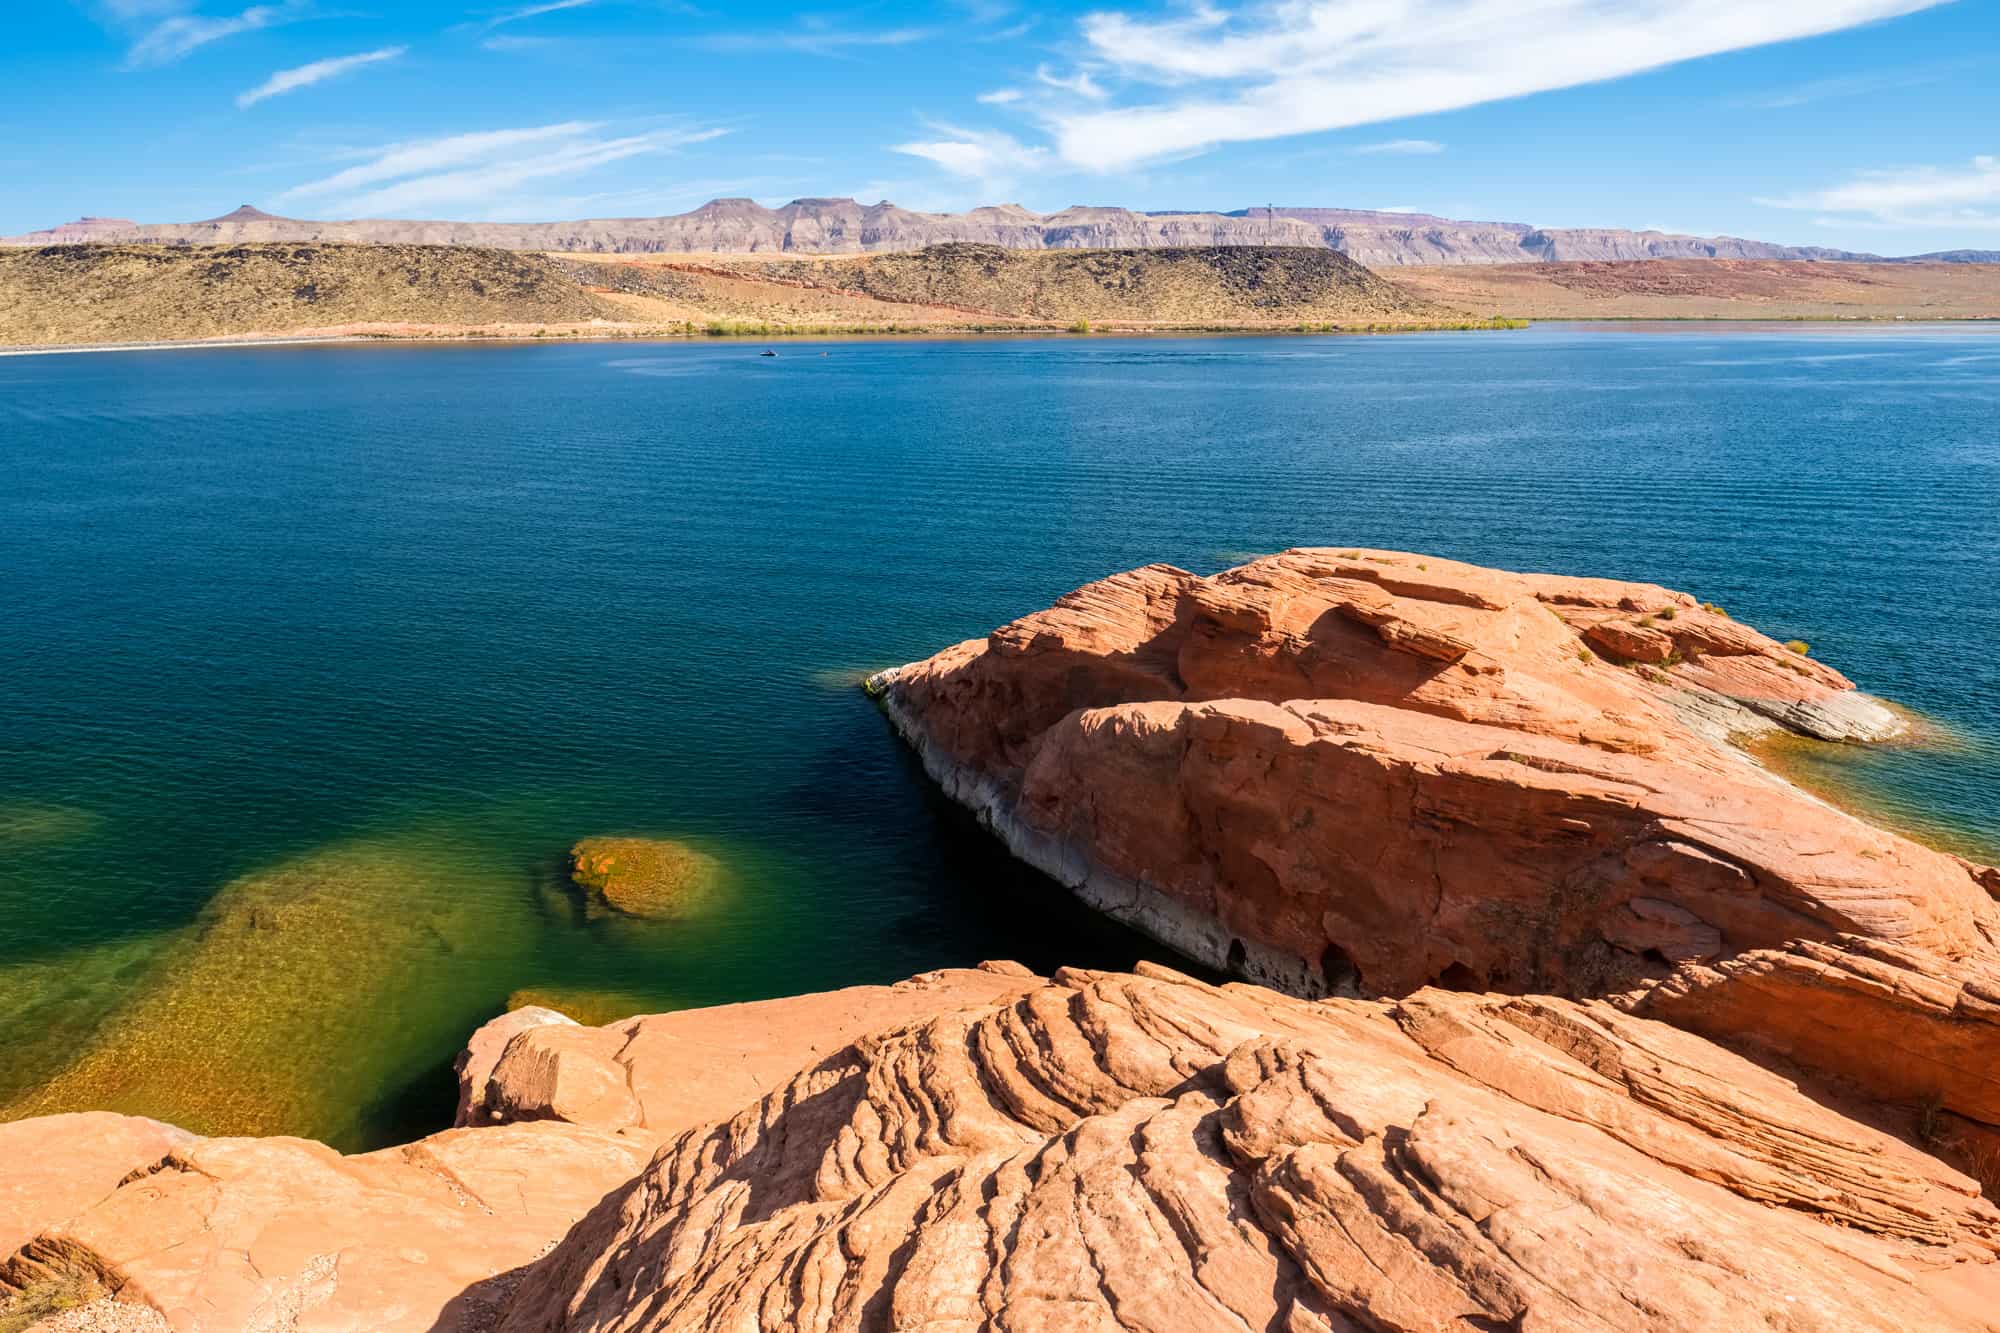 the sand hollow state park consists of a huge lake offering plenty of water activities, photo shows the lake with red rocks along the shoreline